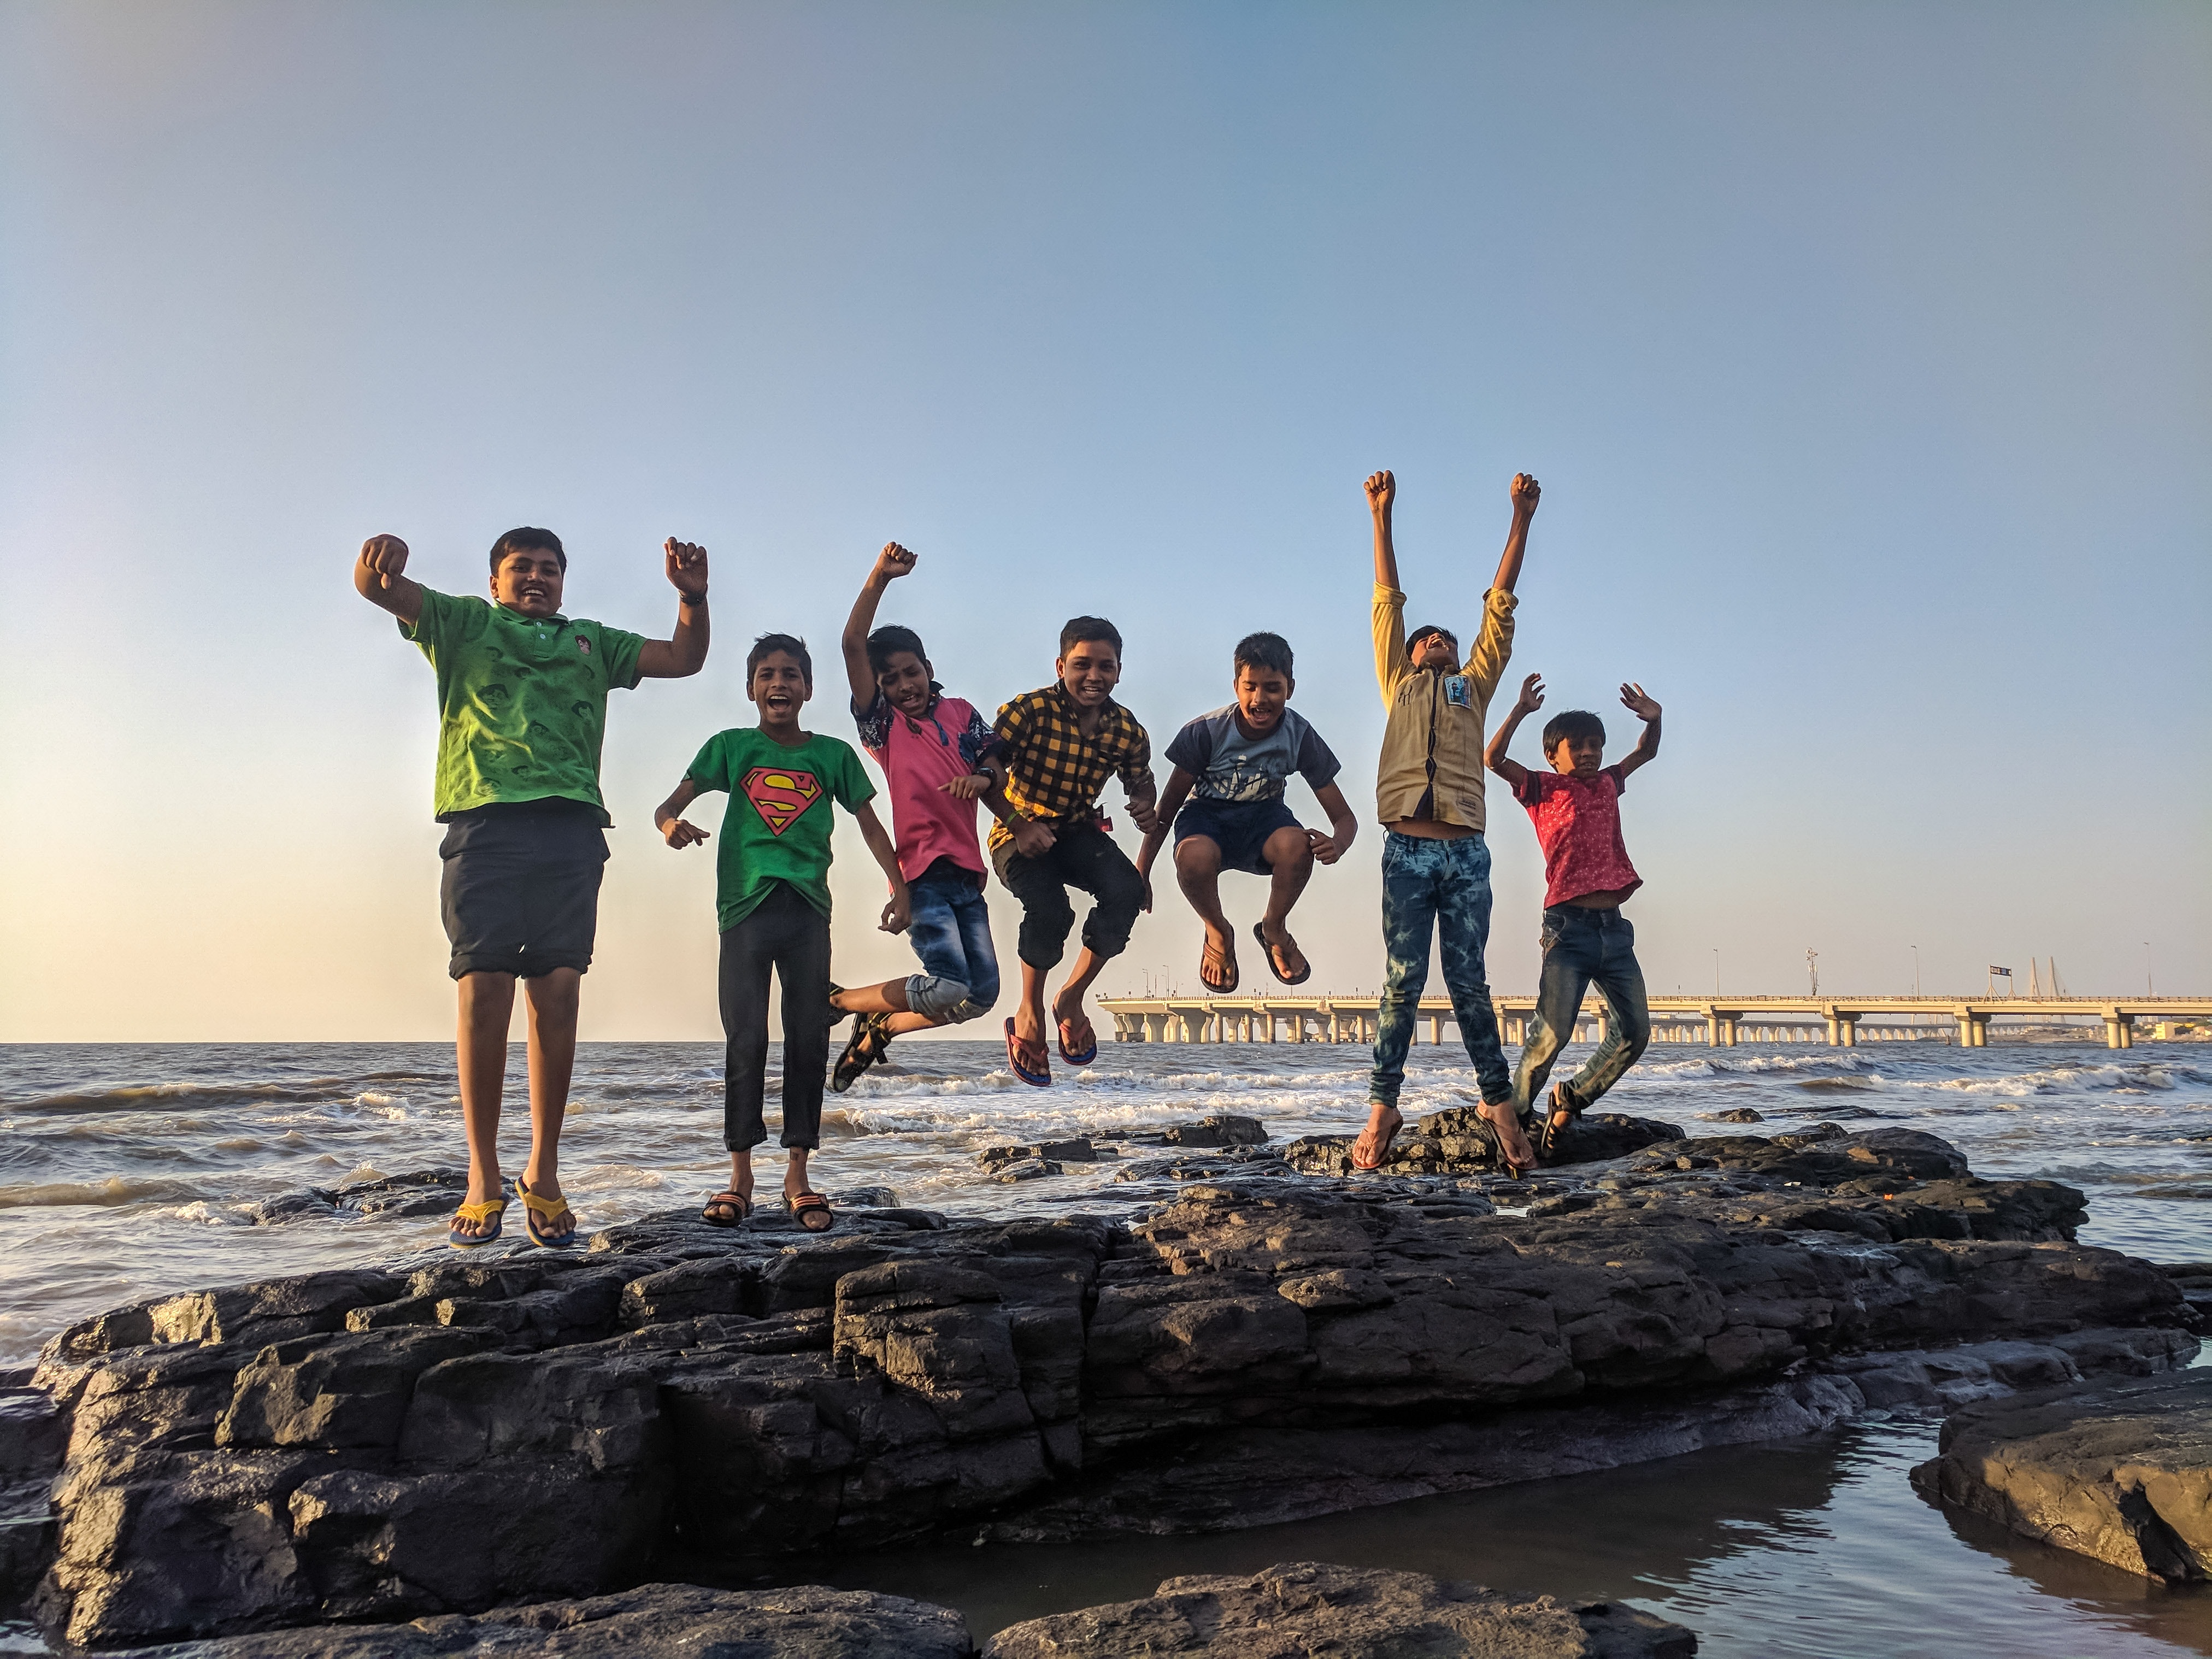 kids jumping up high on the beach